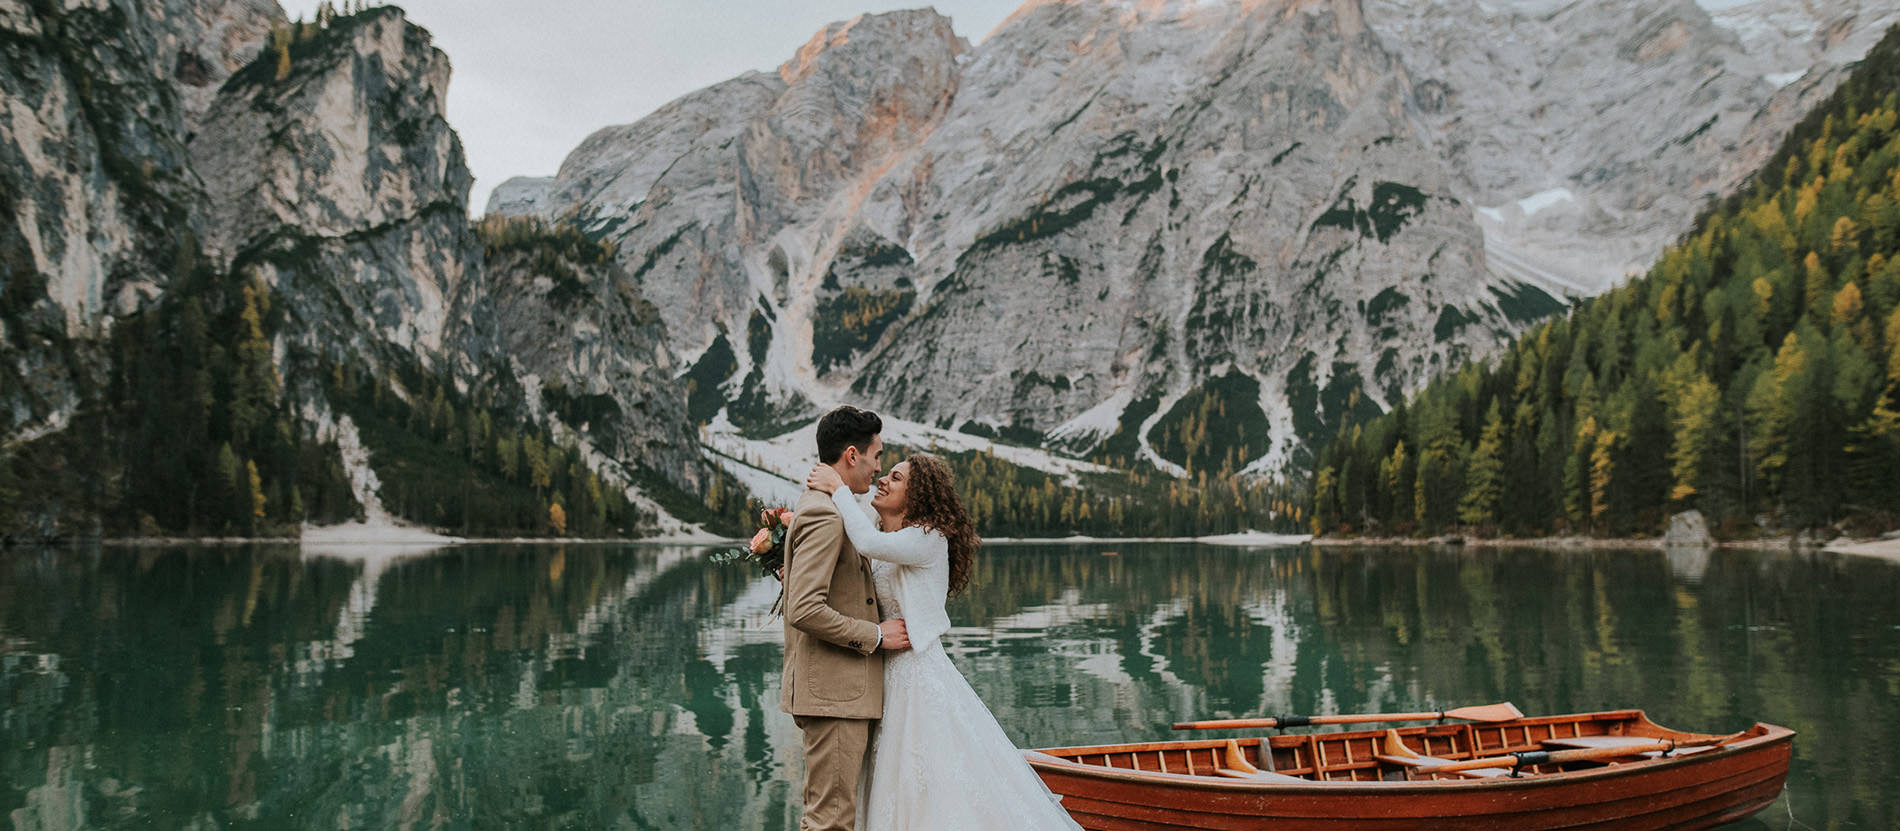 First look at Lago di Braies on the day of the adventure elopement at Pragser Wildsee